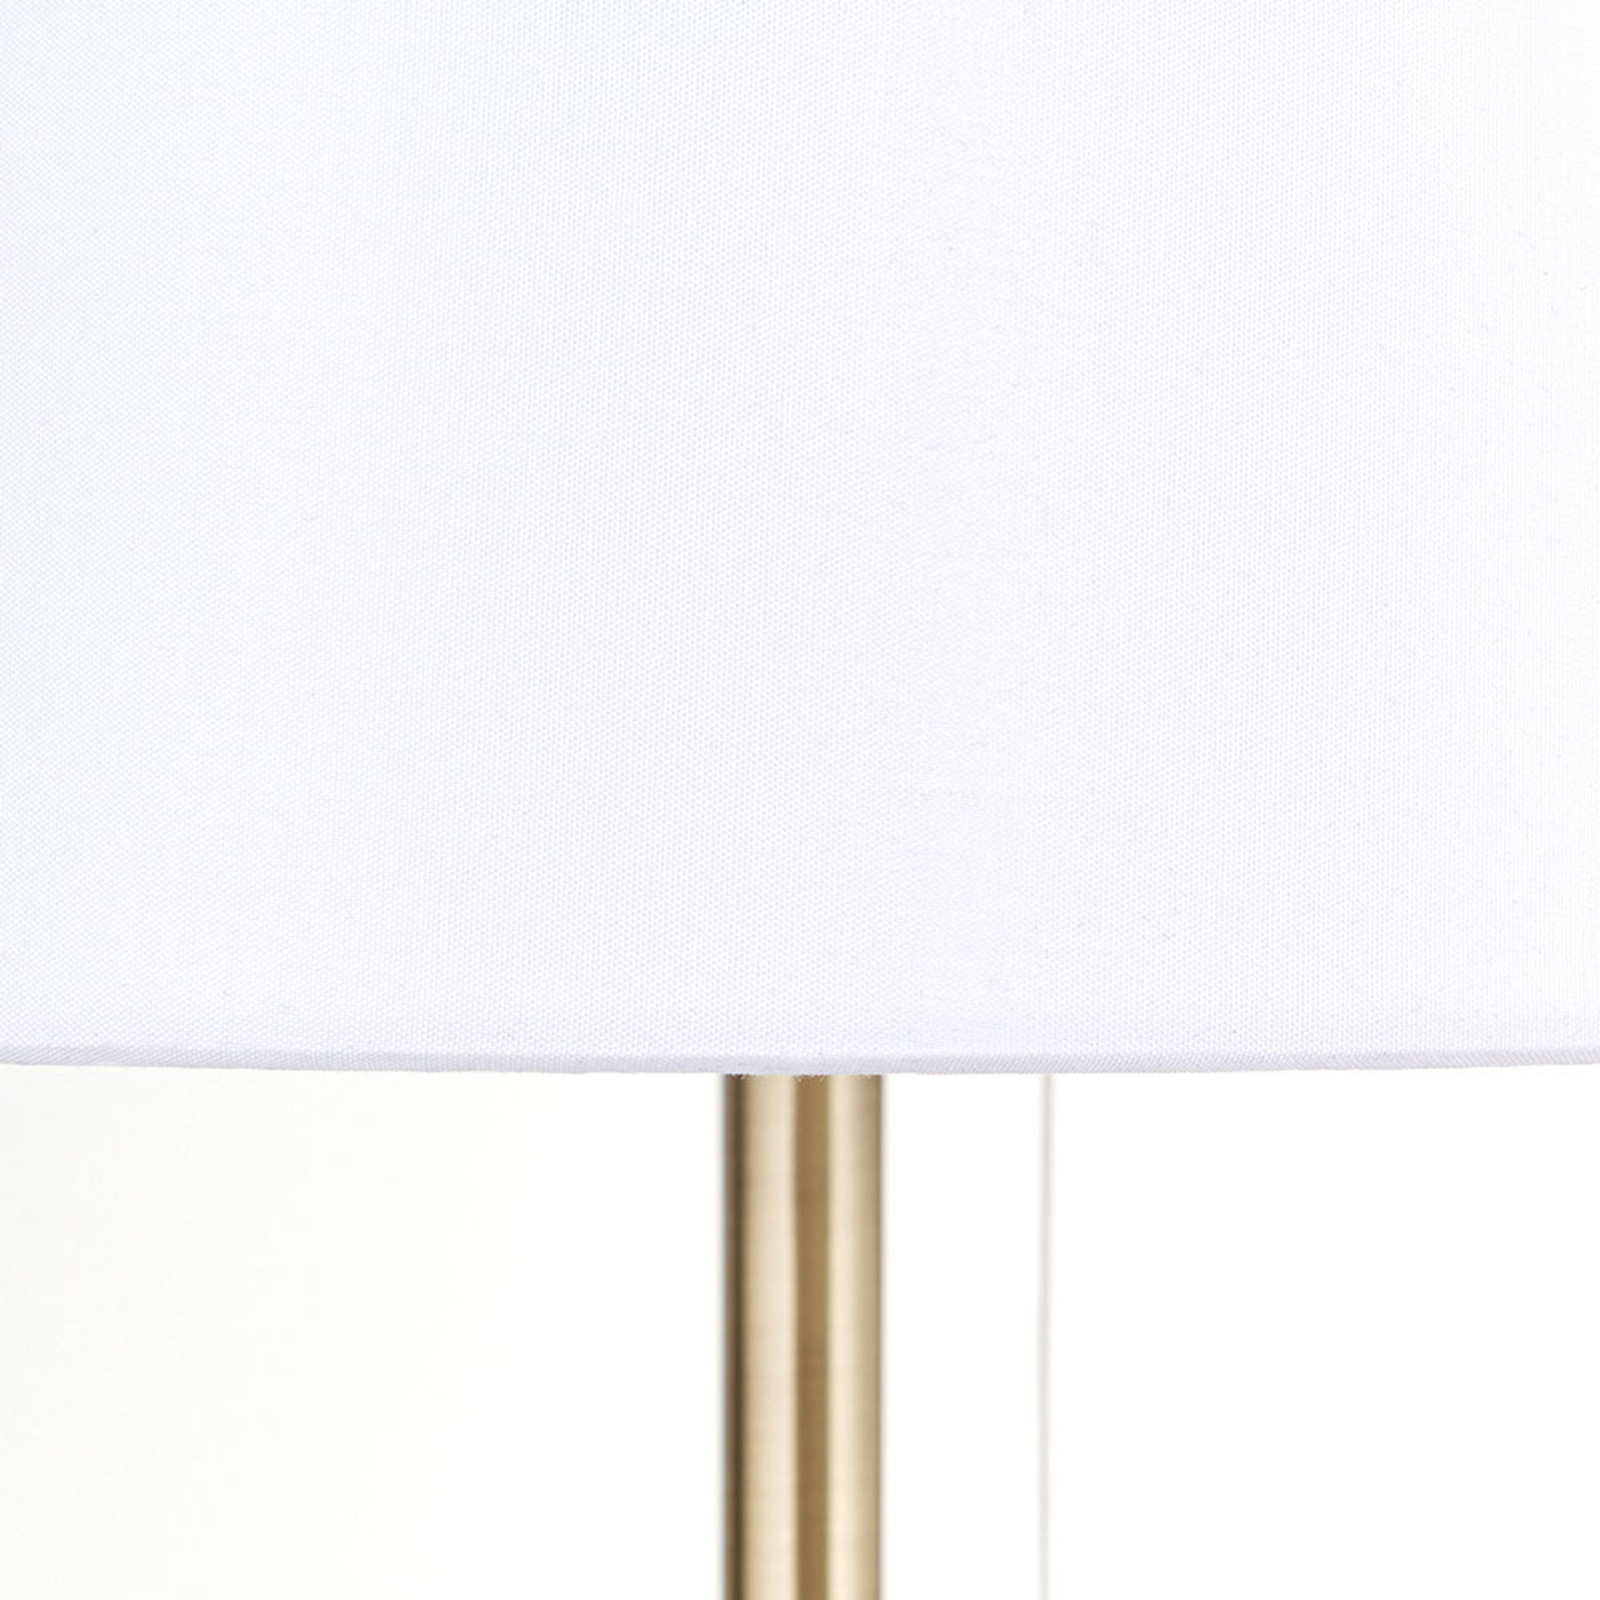 Ludwig table lamp, USB port white/antique brass